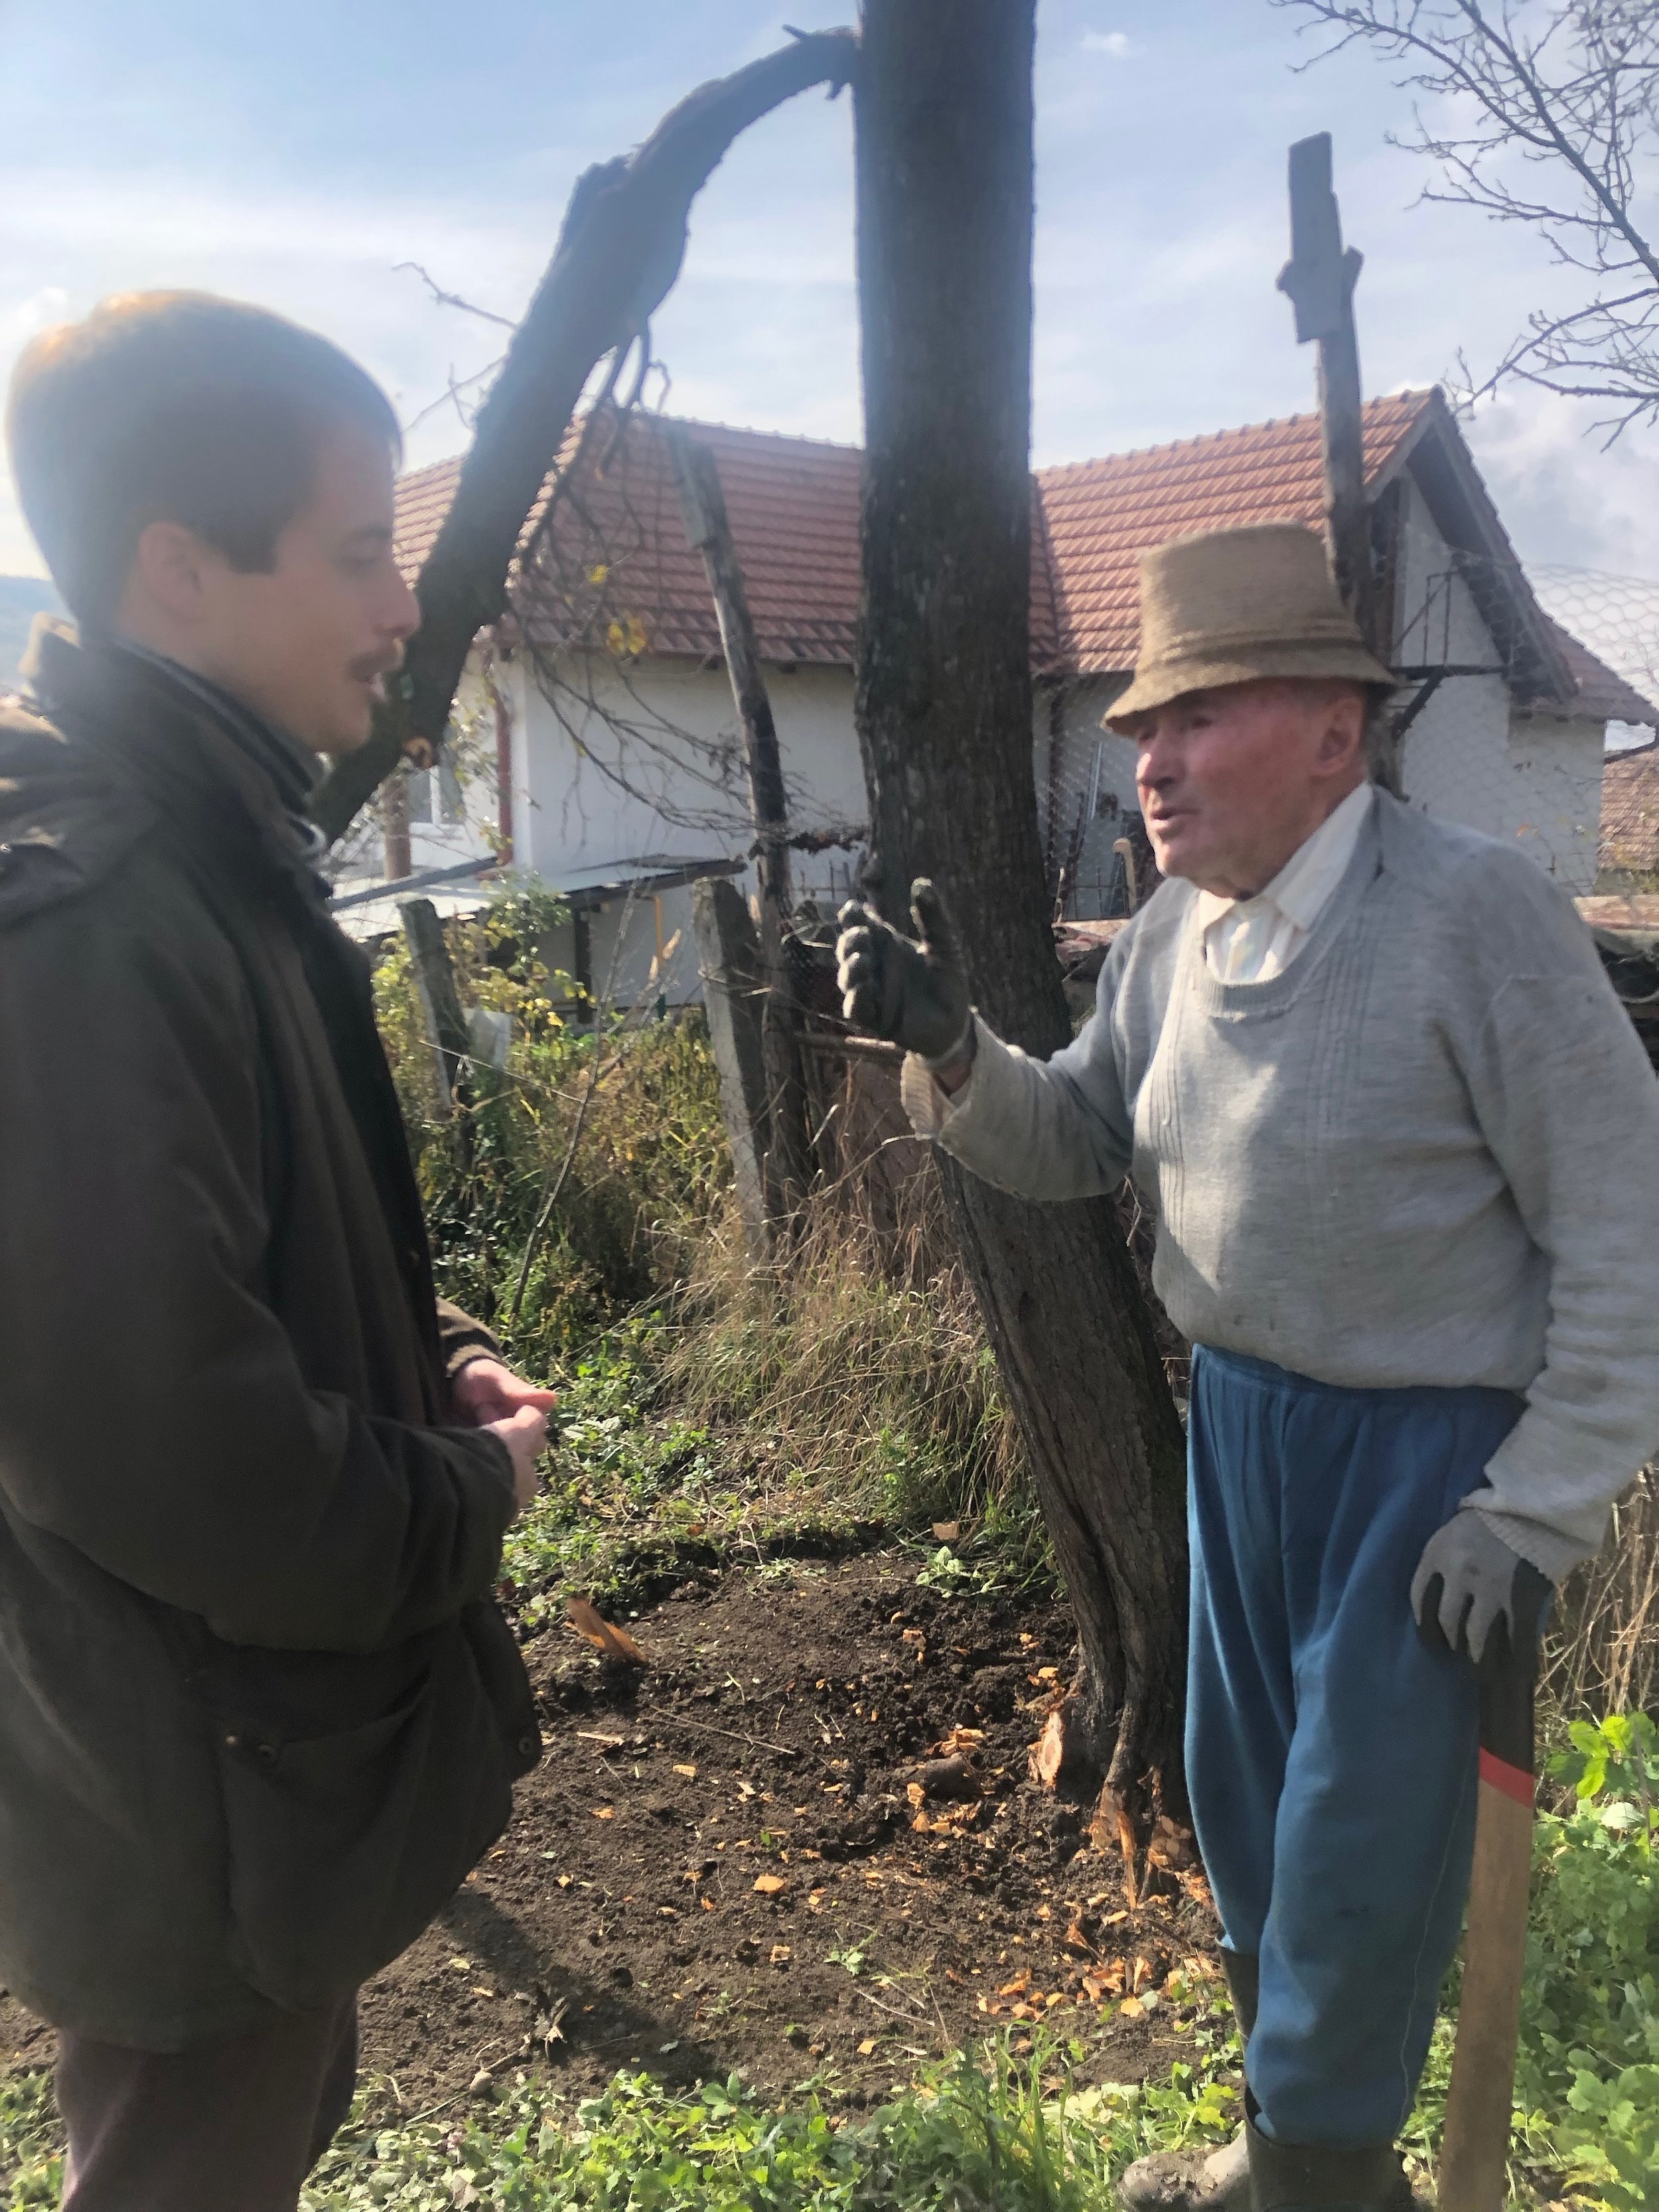  Talking to Pista bácsi after finding him chopping down a tree 